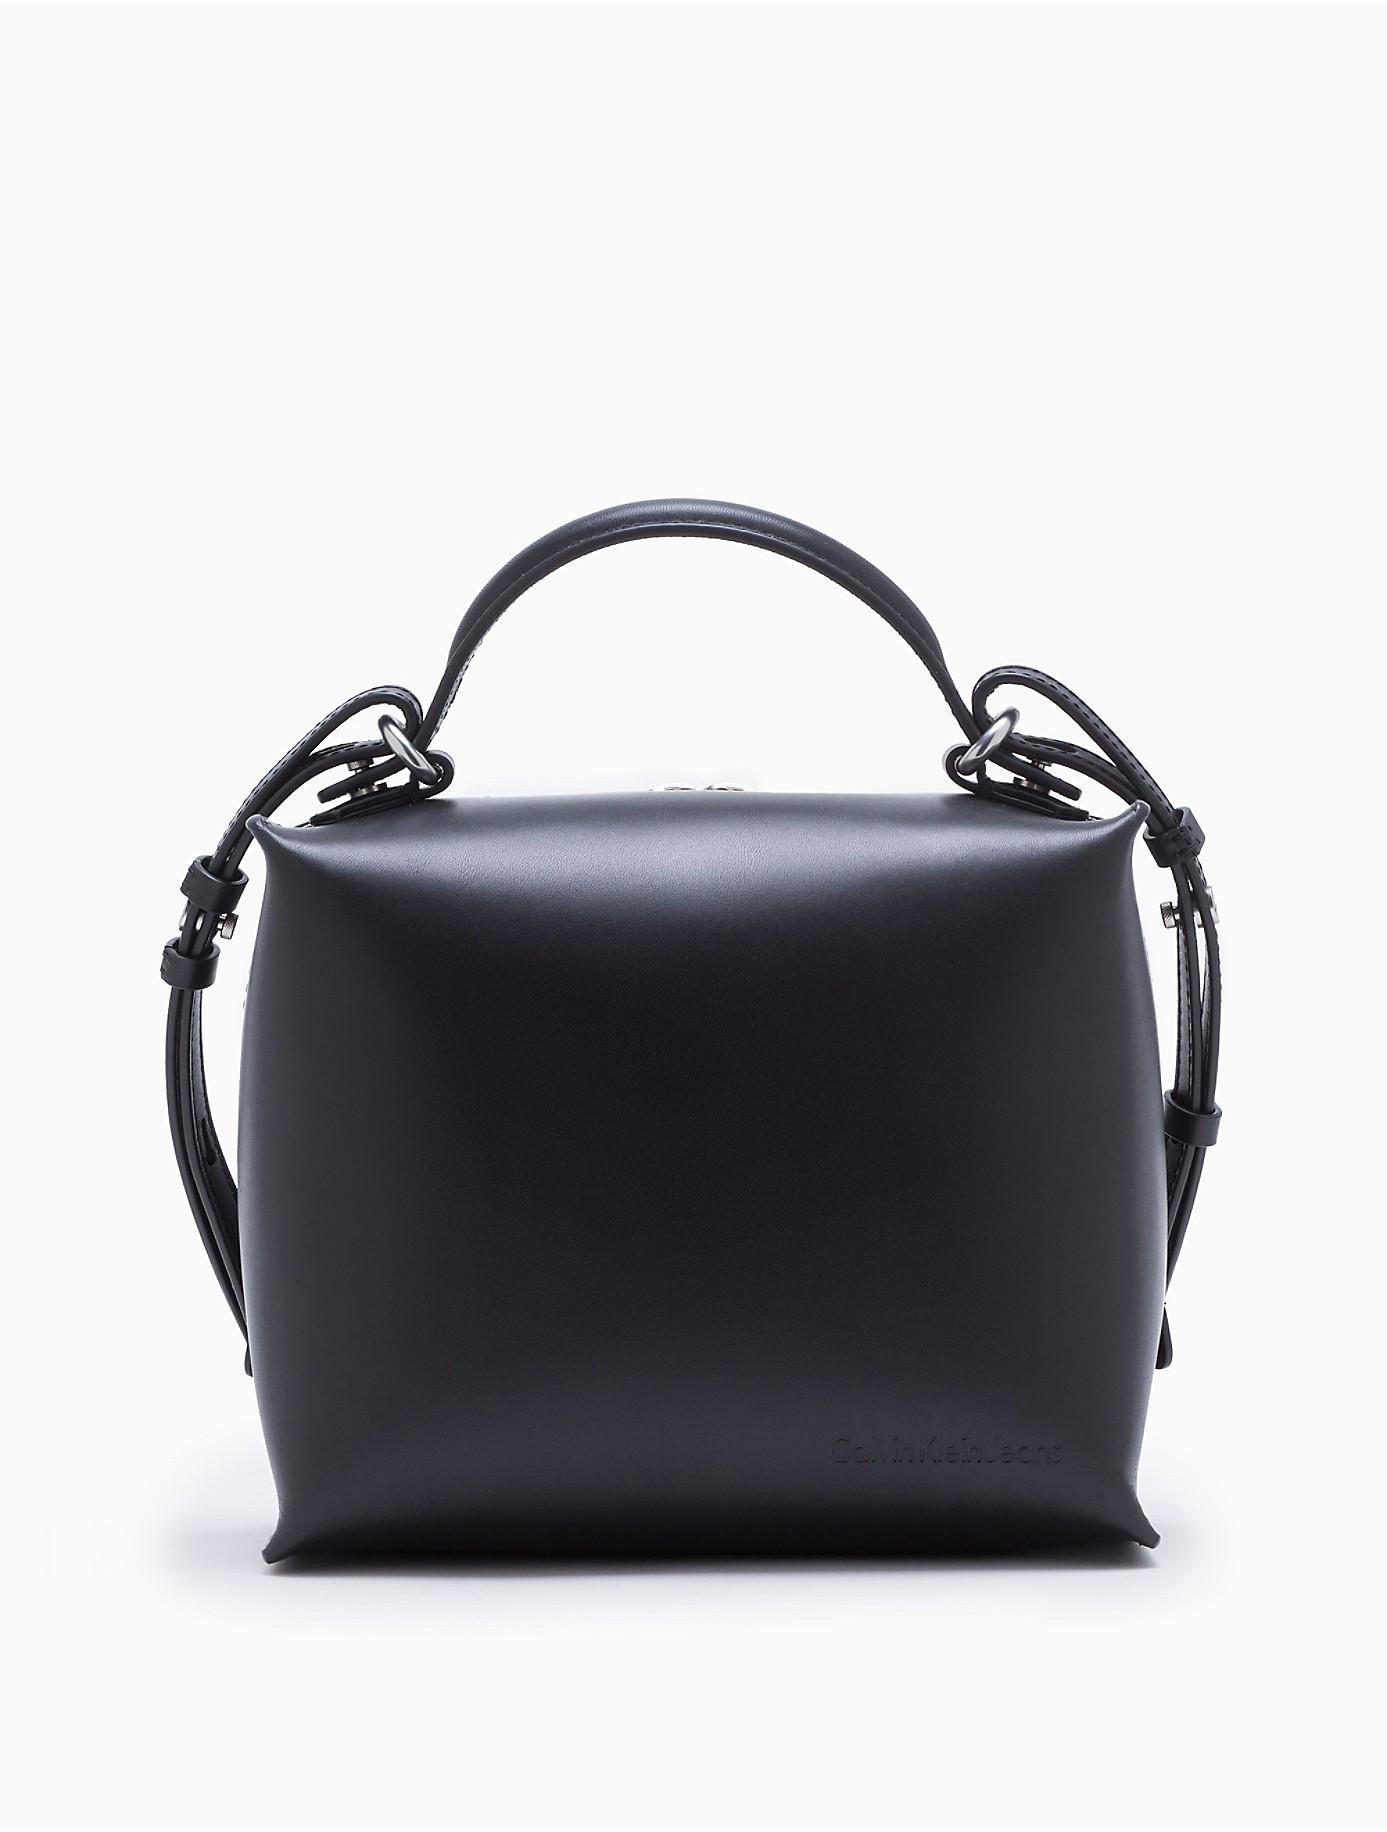 CALVIN KLEIN 205W39NYC Leather Lunch Box Bag in Black